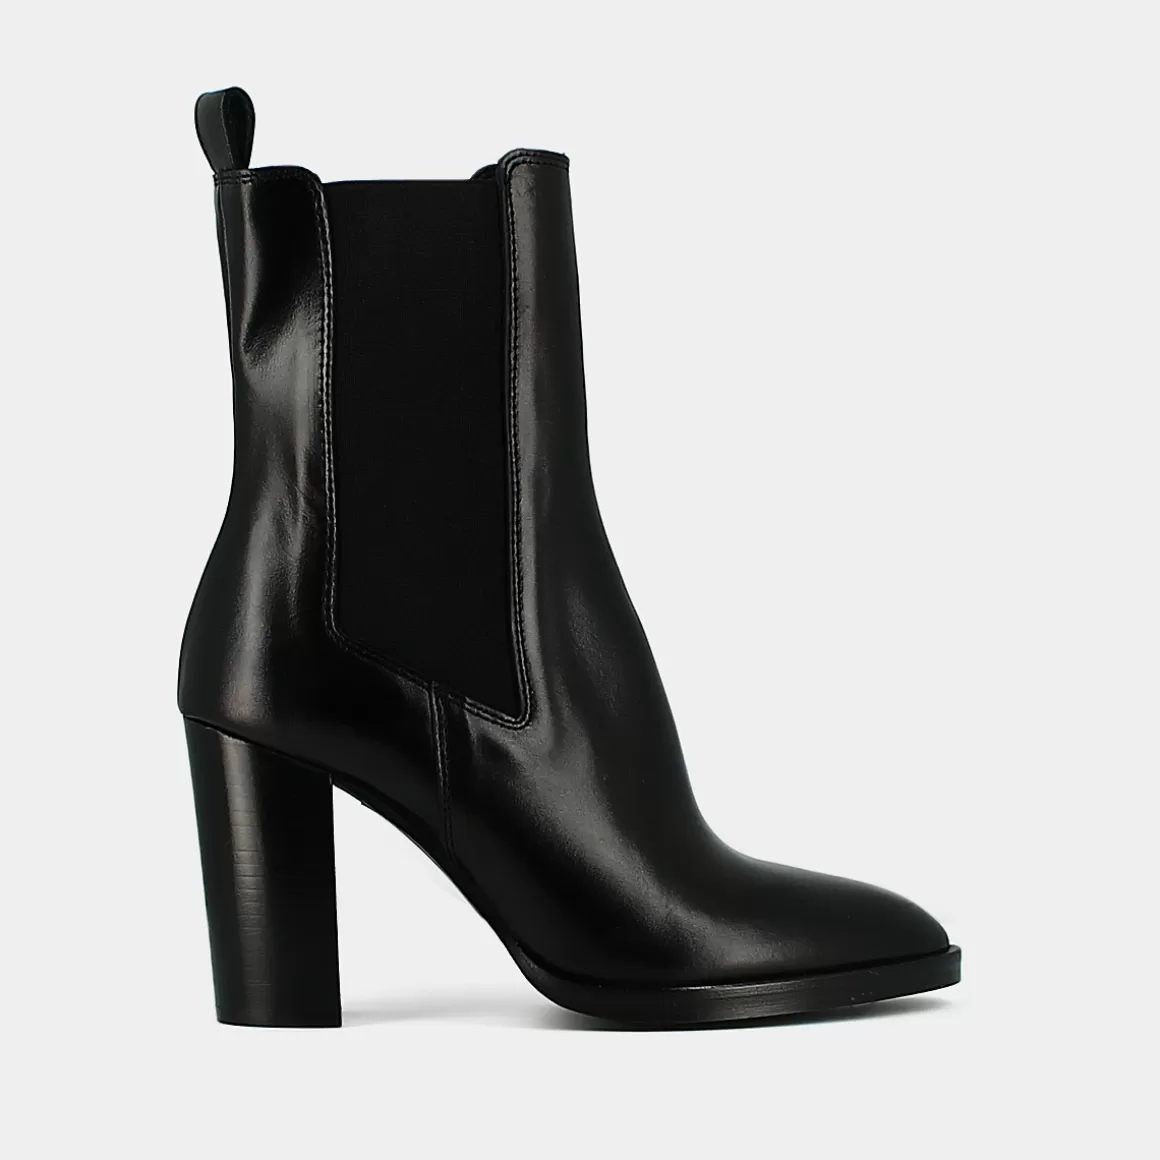 Pointed toe elasticated boots<Jonak Cheap